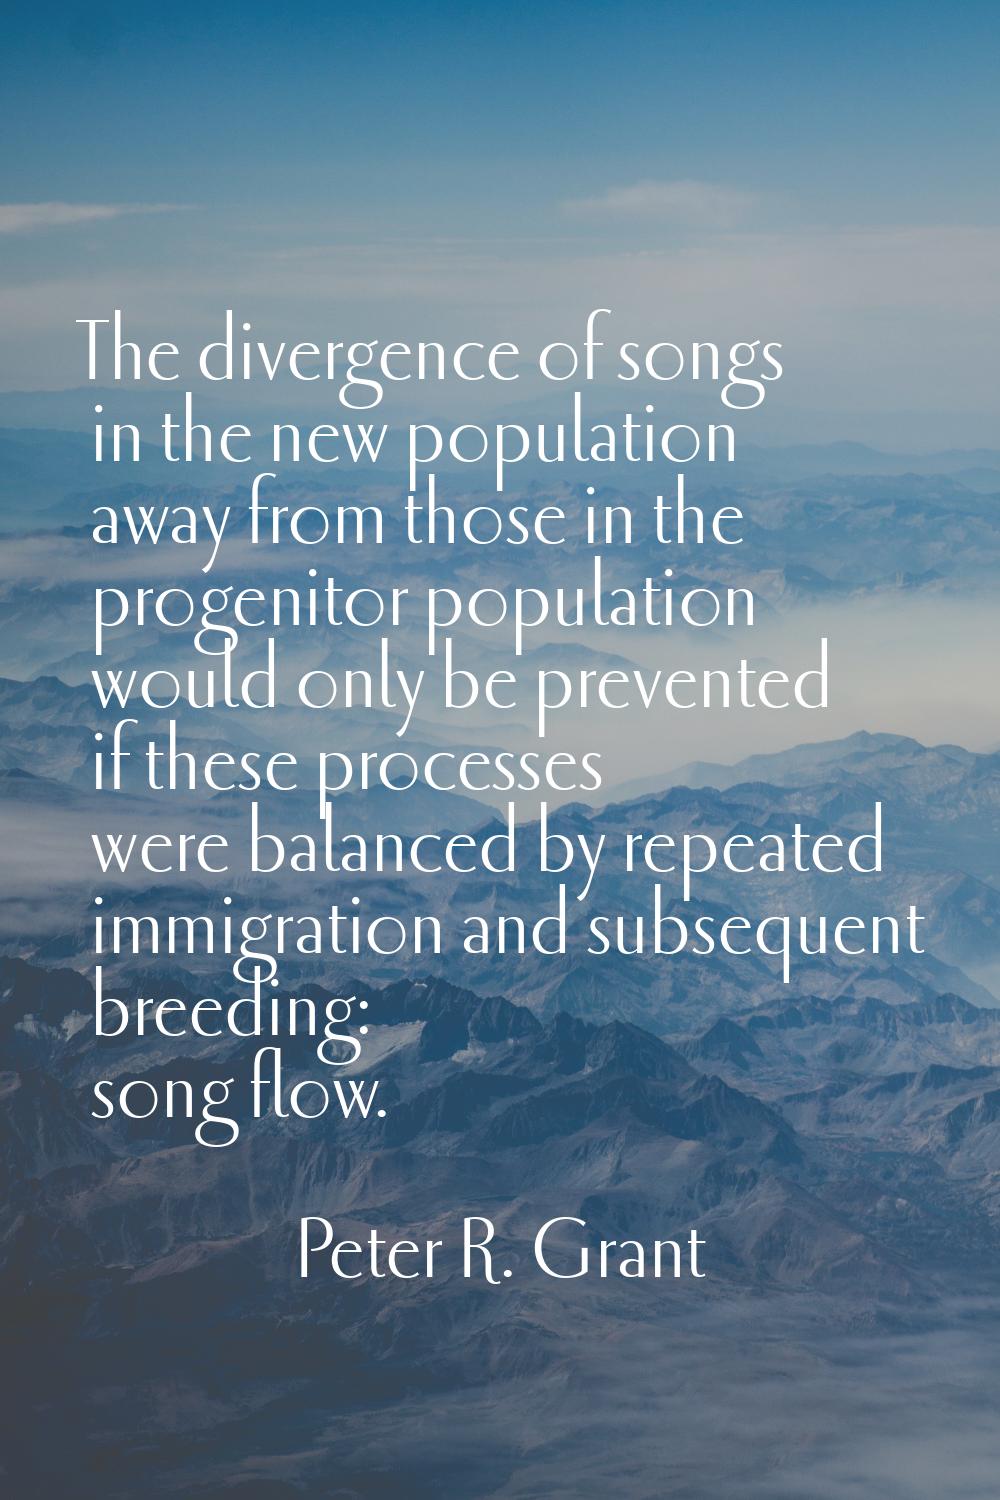 The divergence of songs in the new population away from those in the progenitor population would on